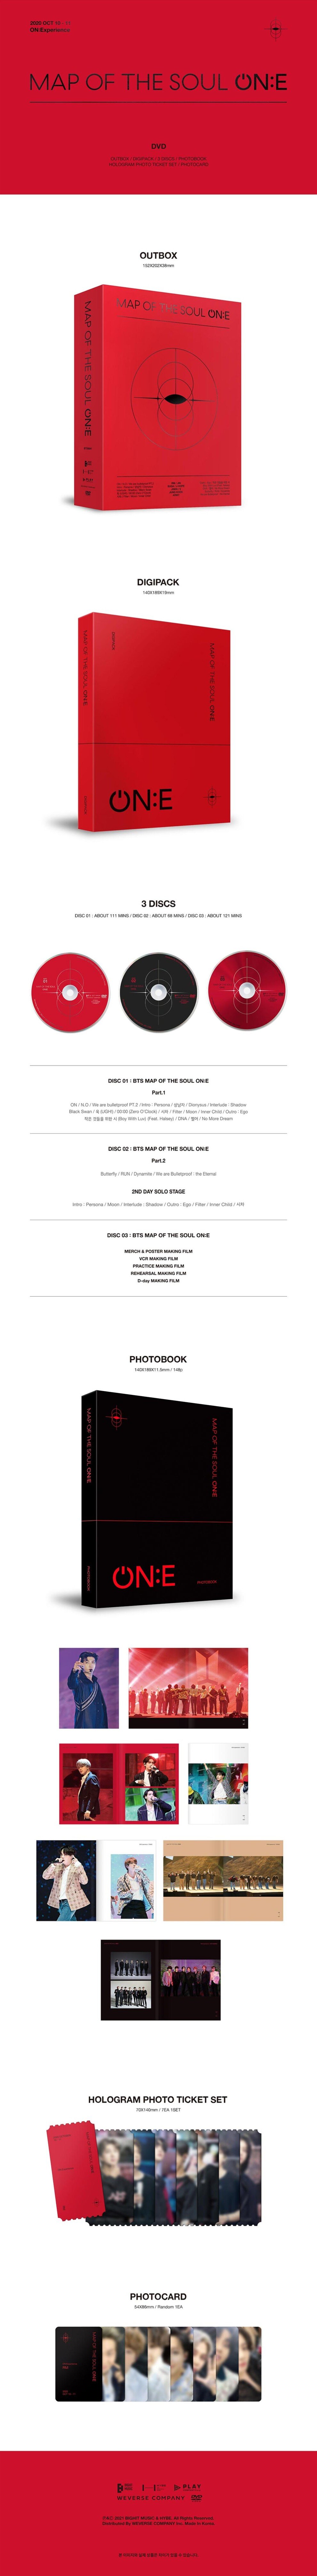 BTS MAP OF THE SOUL ONE DVD - K-POP